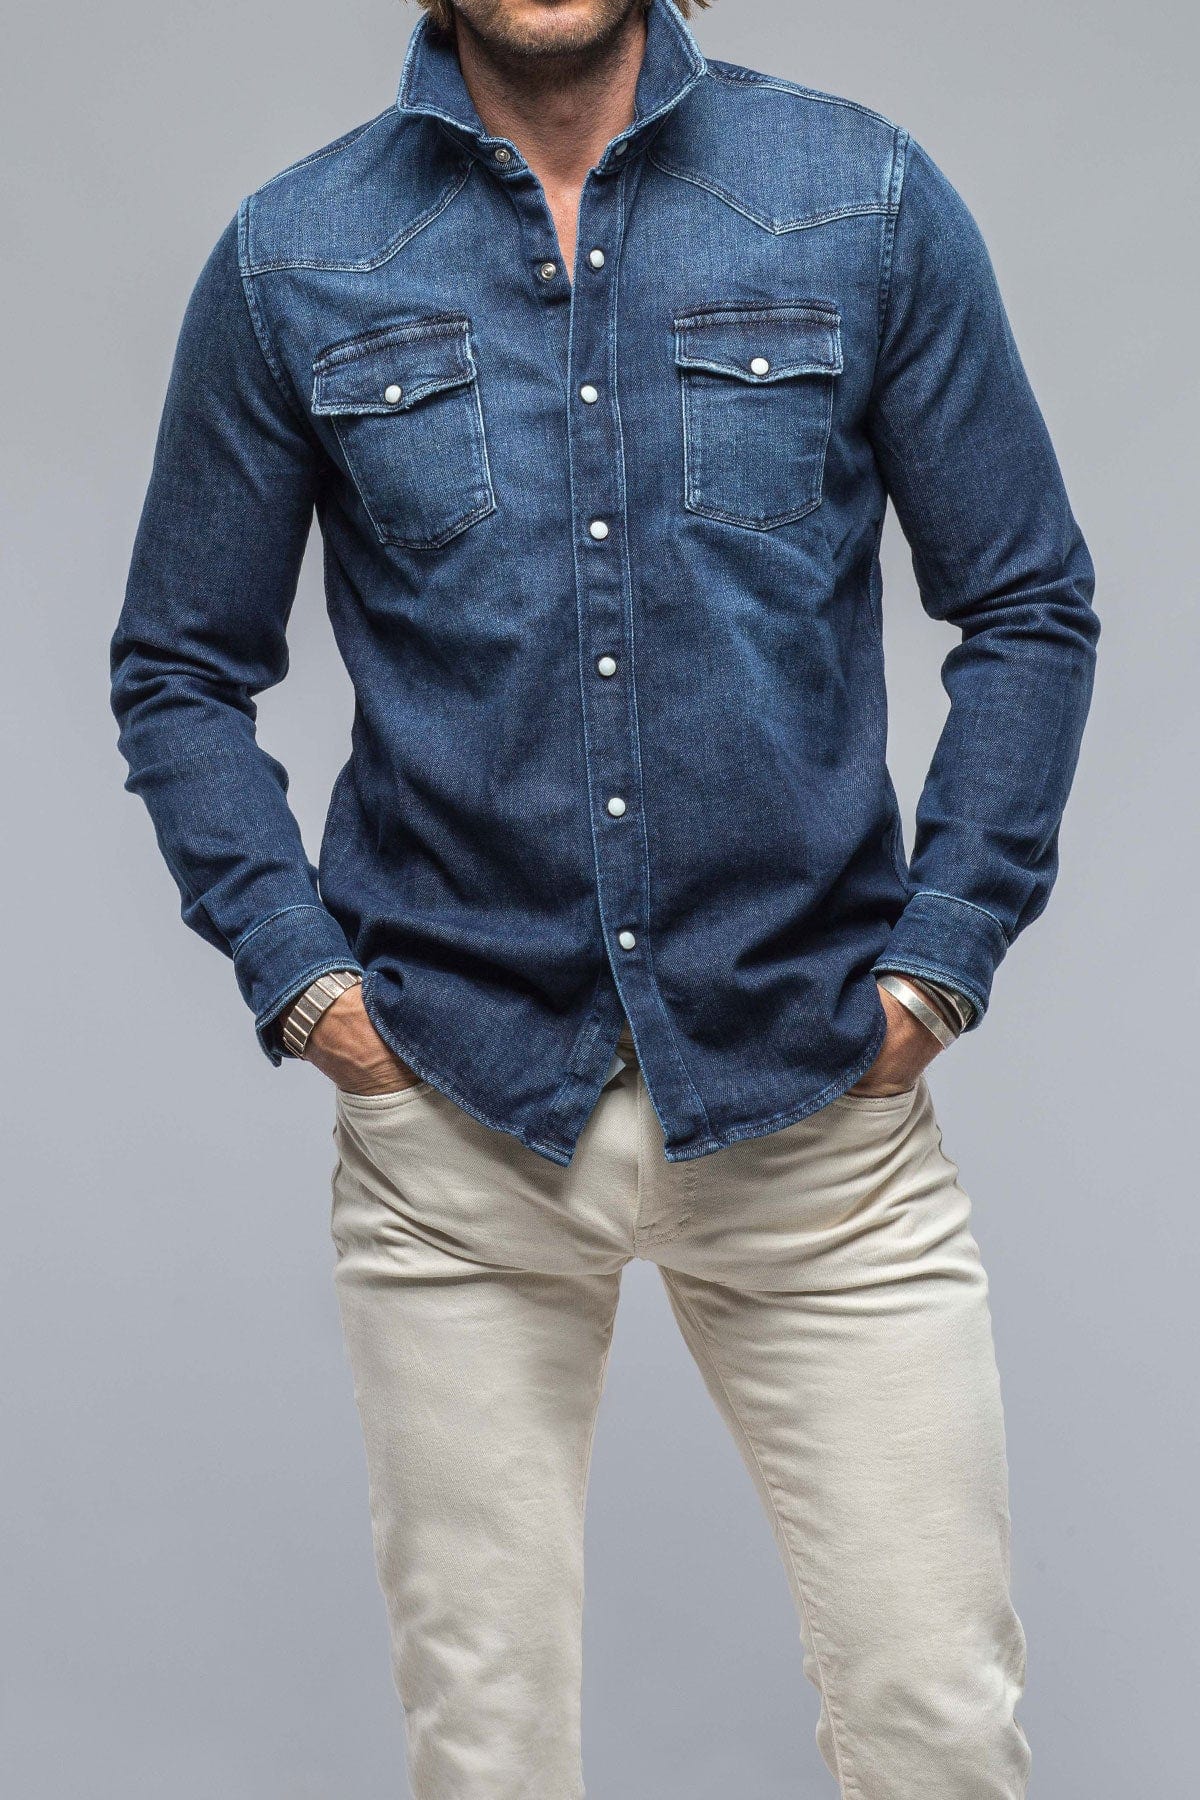 Shirts - Buy from Latest Collection of Shirt Online at Best Price | Myntra